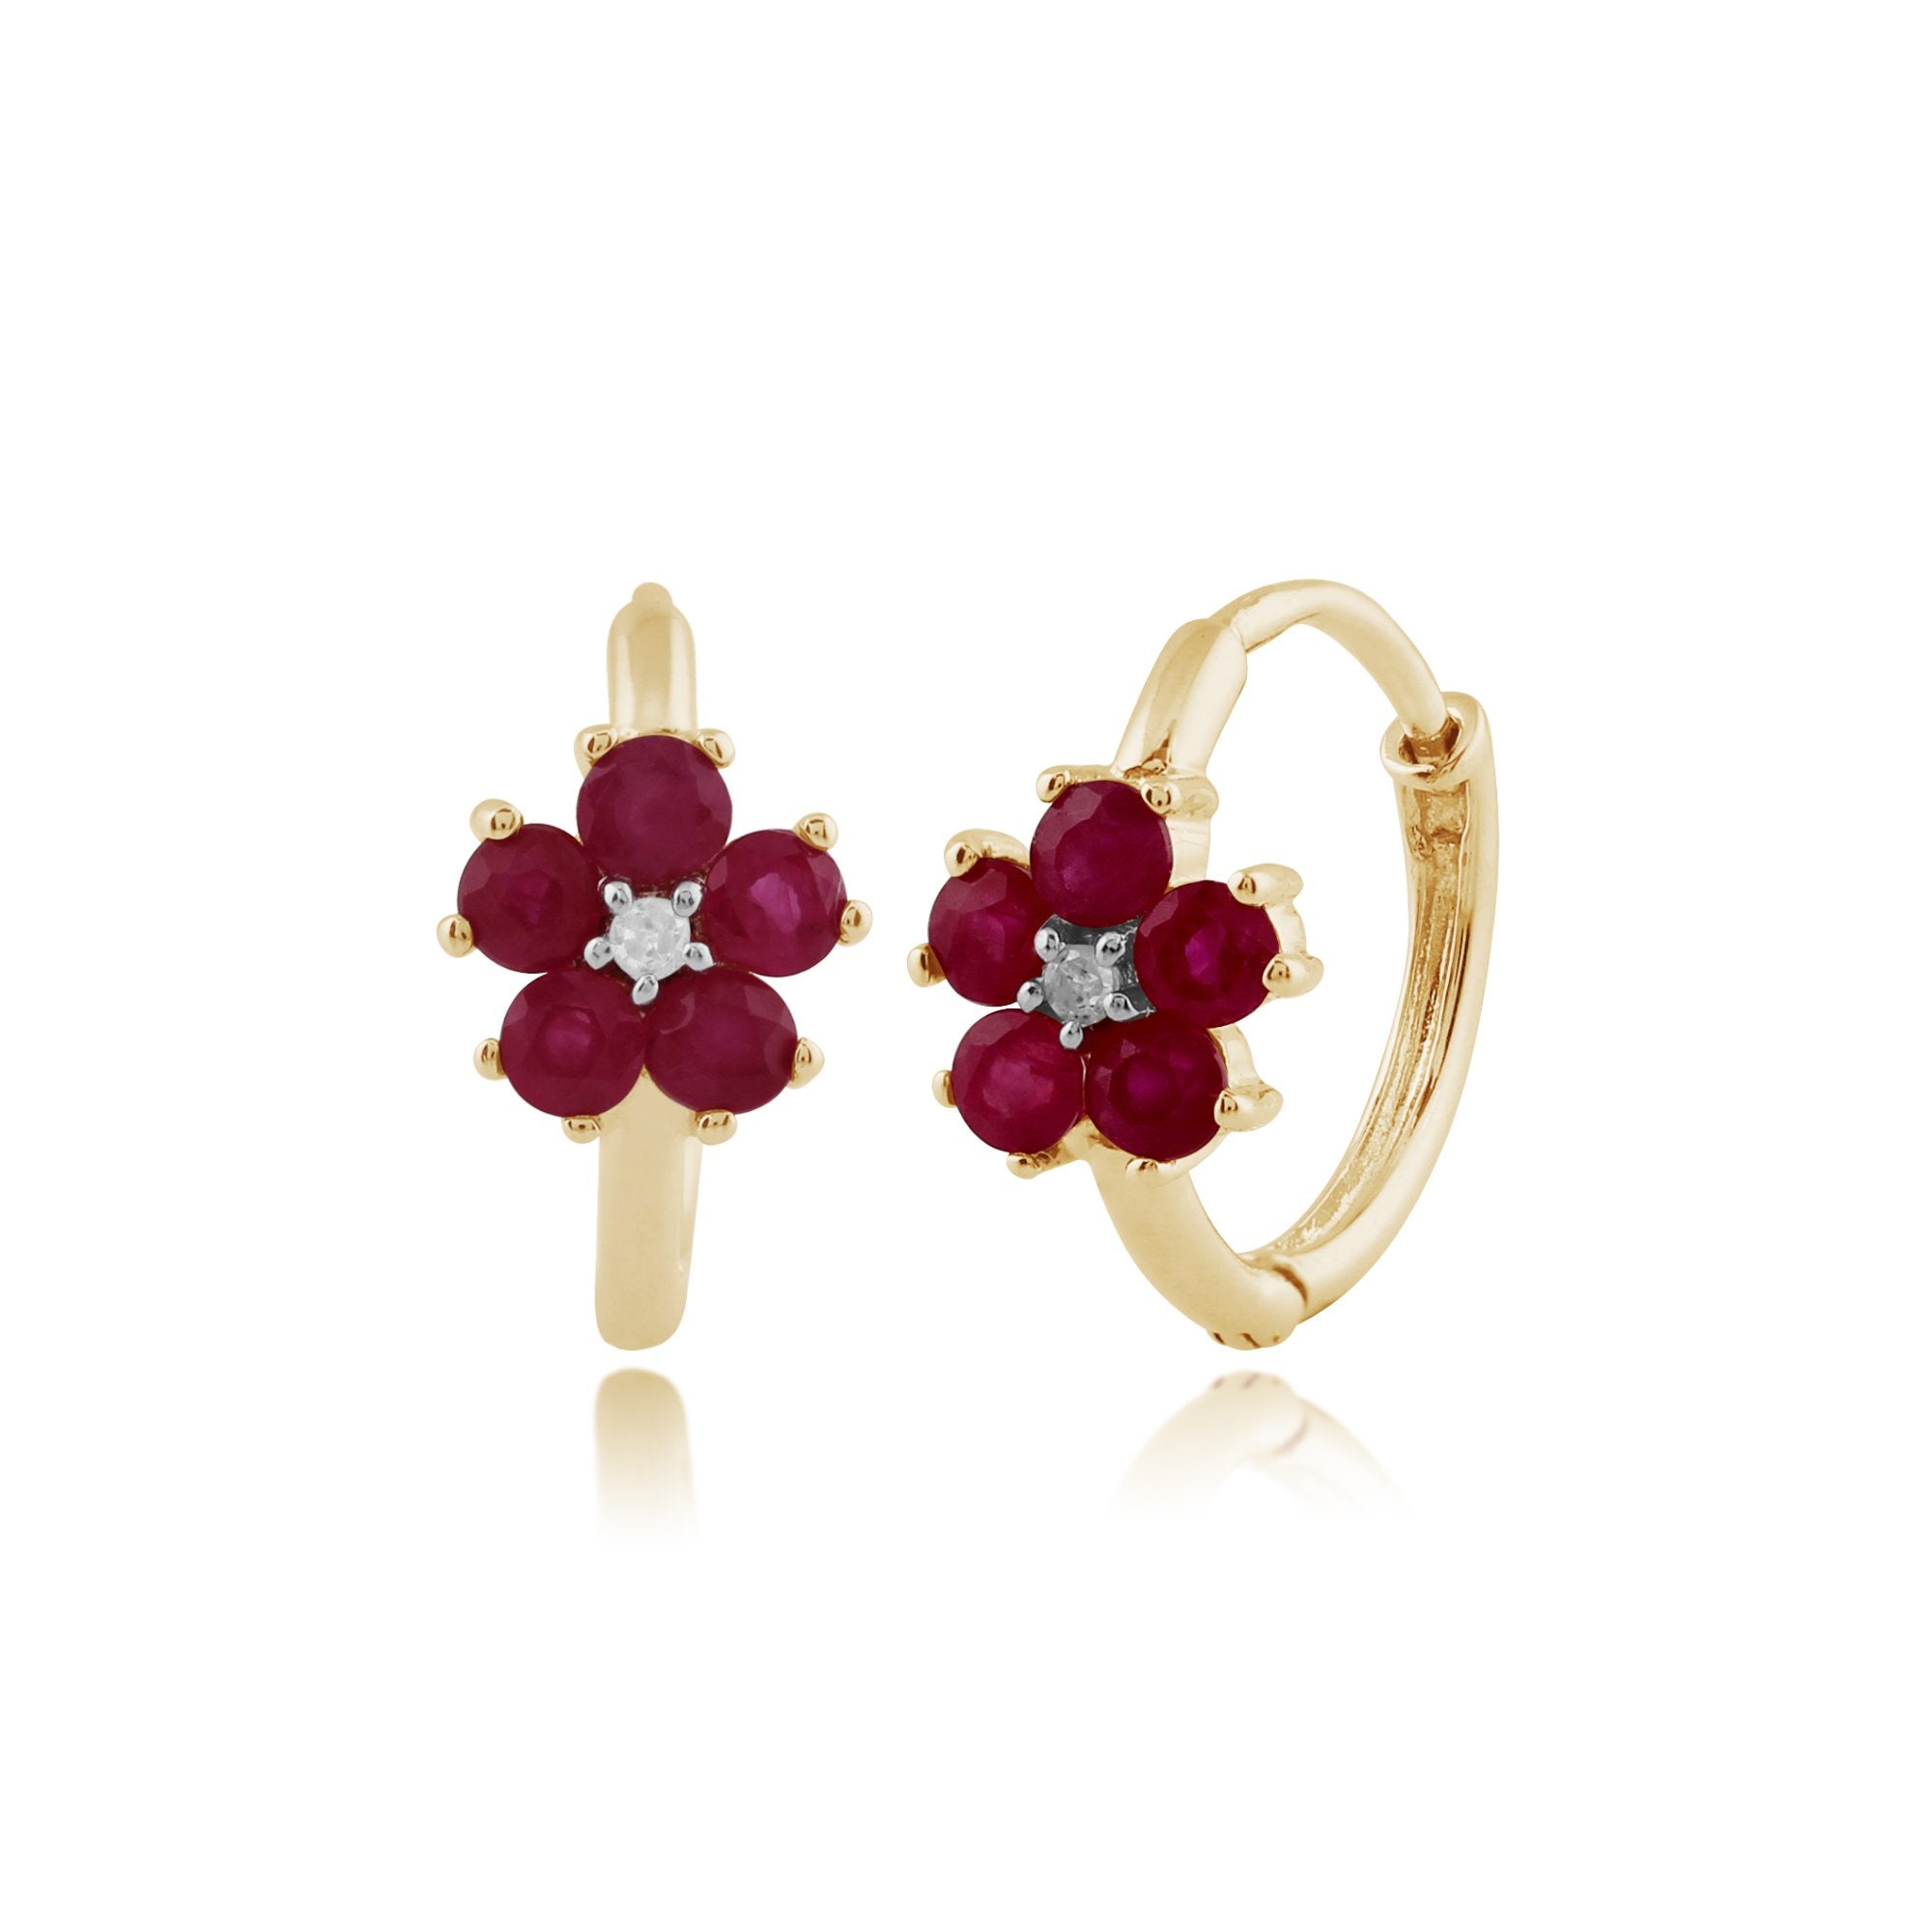 Floral Round Ruby & Diamond Hoop Earrings in 9ct Yellow Gold